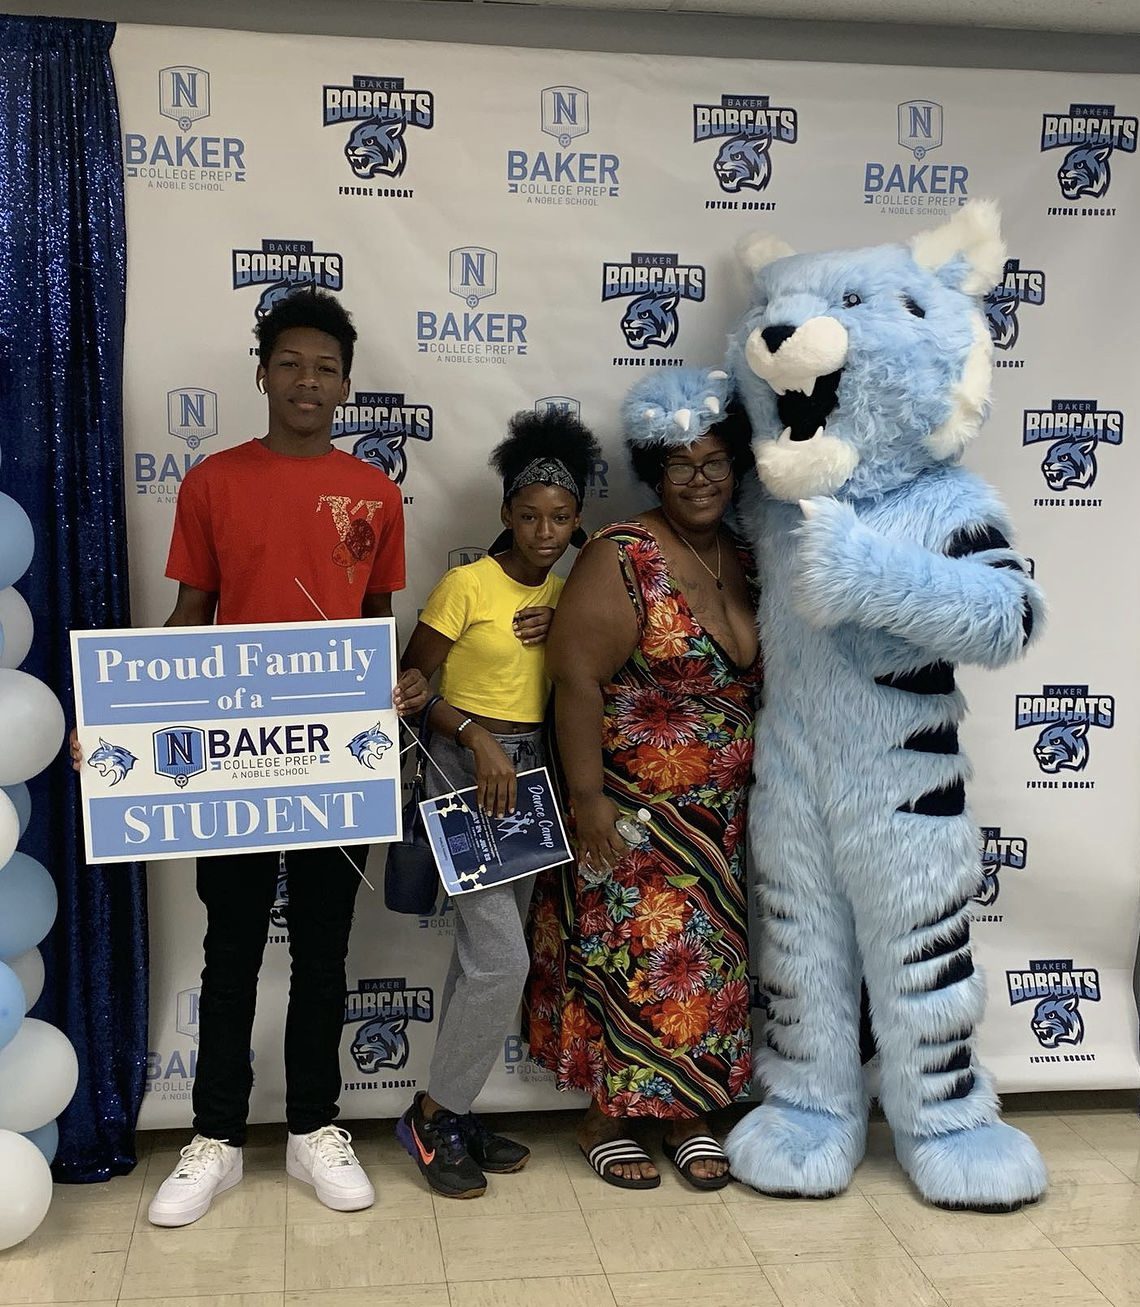 Photo shows a new Baker College Prep student and their two family members posing with the Baker Bobcat mascot in front of a backdrop with the Baker logo. The student holds a light blue and white sign that has the Baker logo on it and says "Proud Family of a Baker College Prep Student"